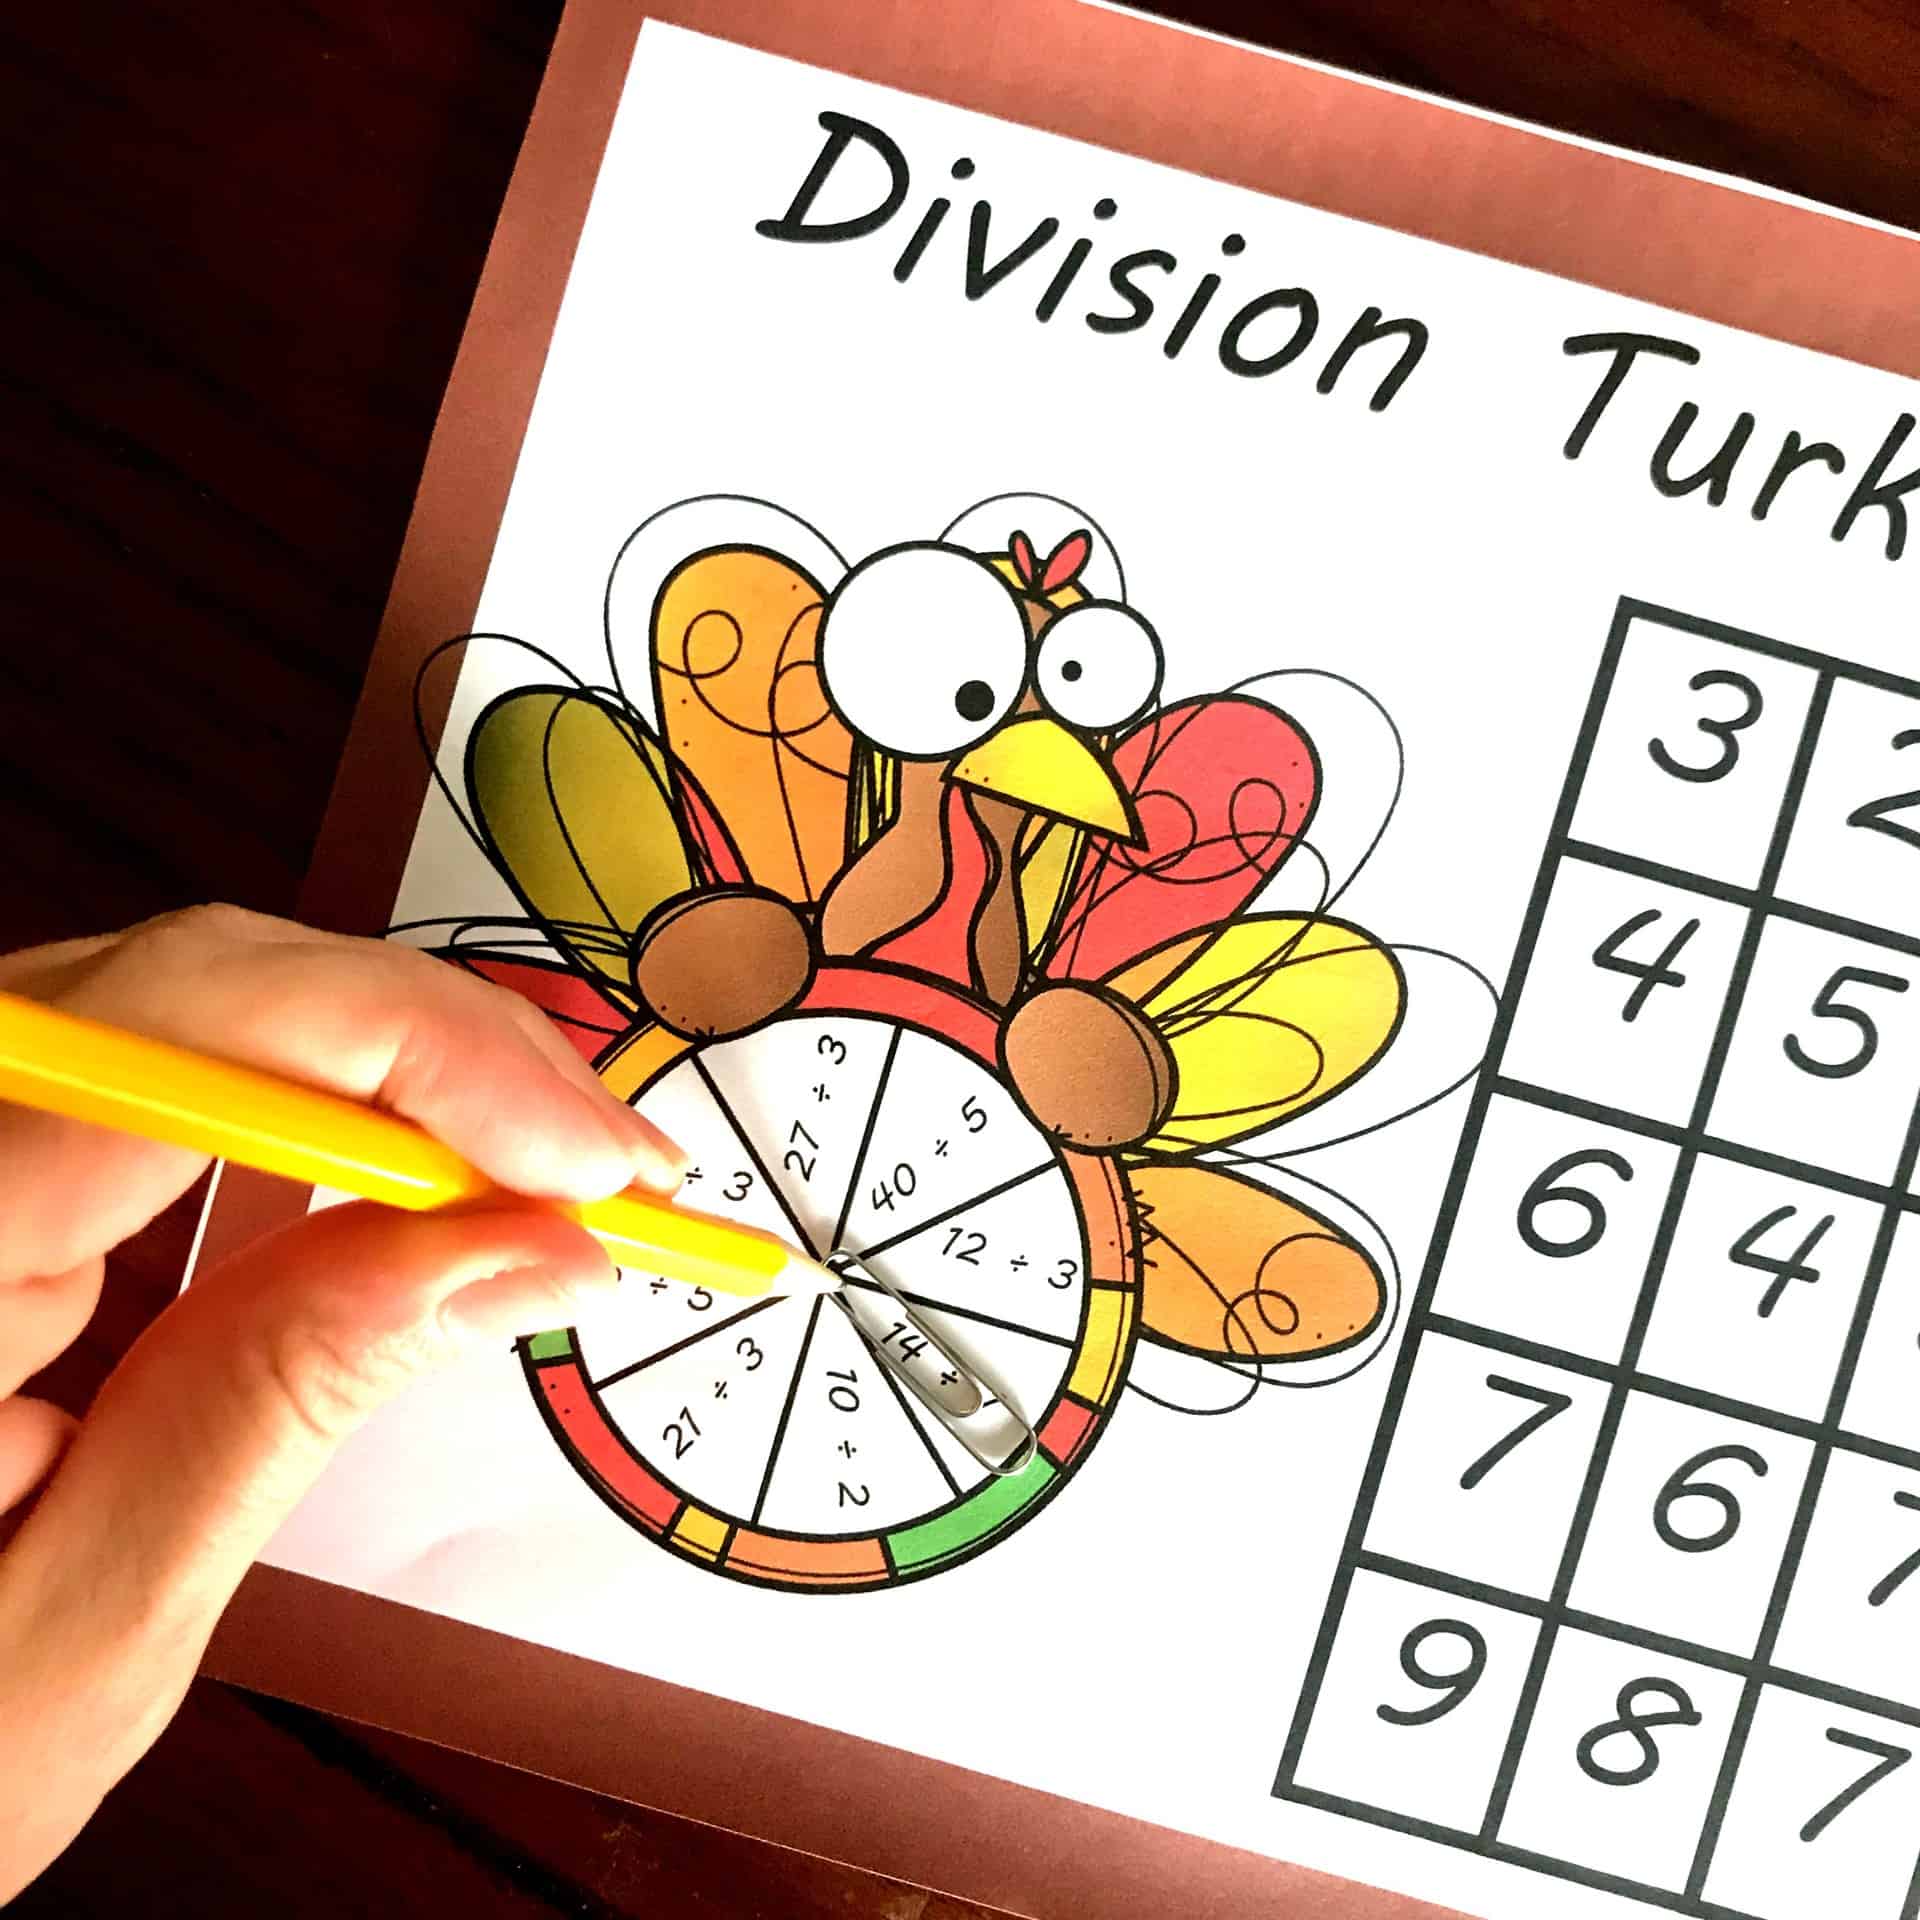 FREE Fun Division Game For Practicing Basic Division Facts